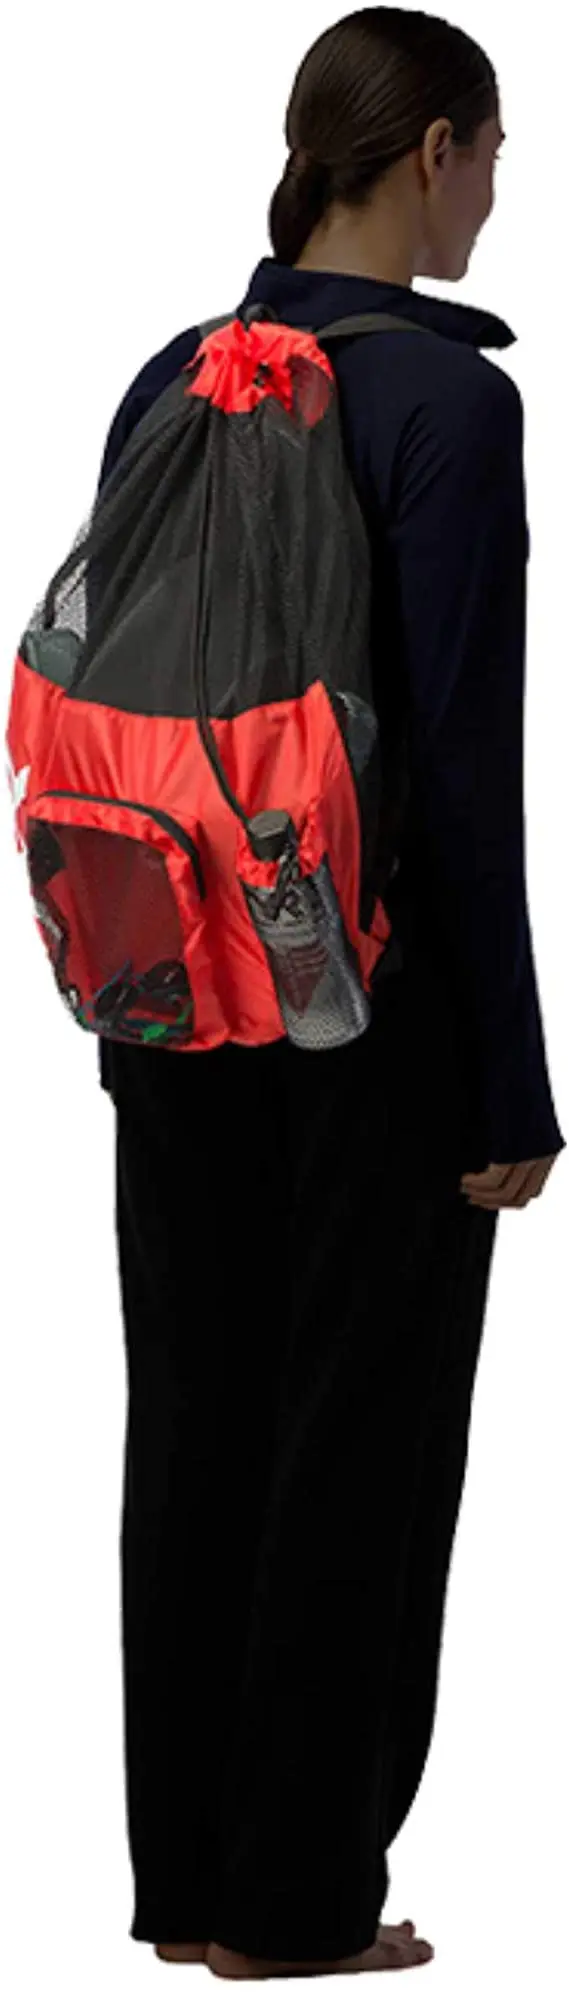 best selling Swimming bag backpack in large capacity, dry compartment sport backpack and trendy Triathlon Transition Bag